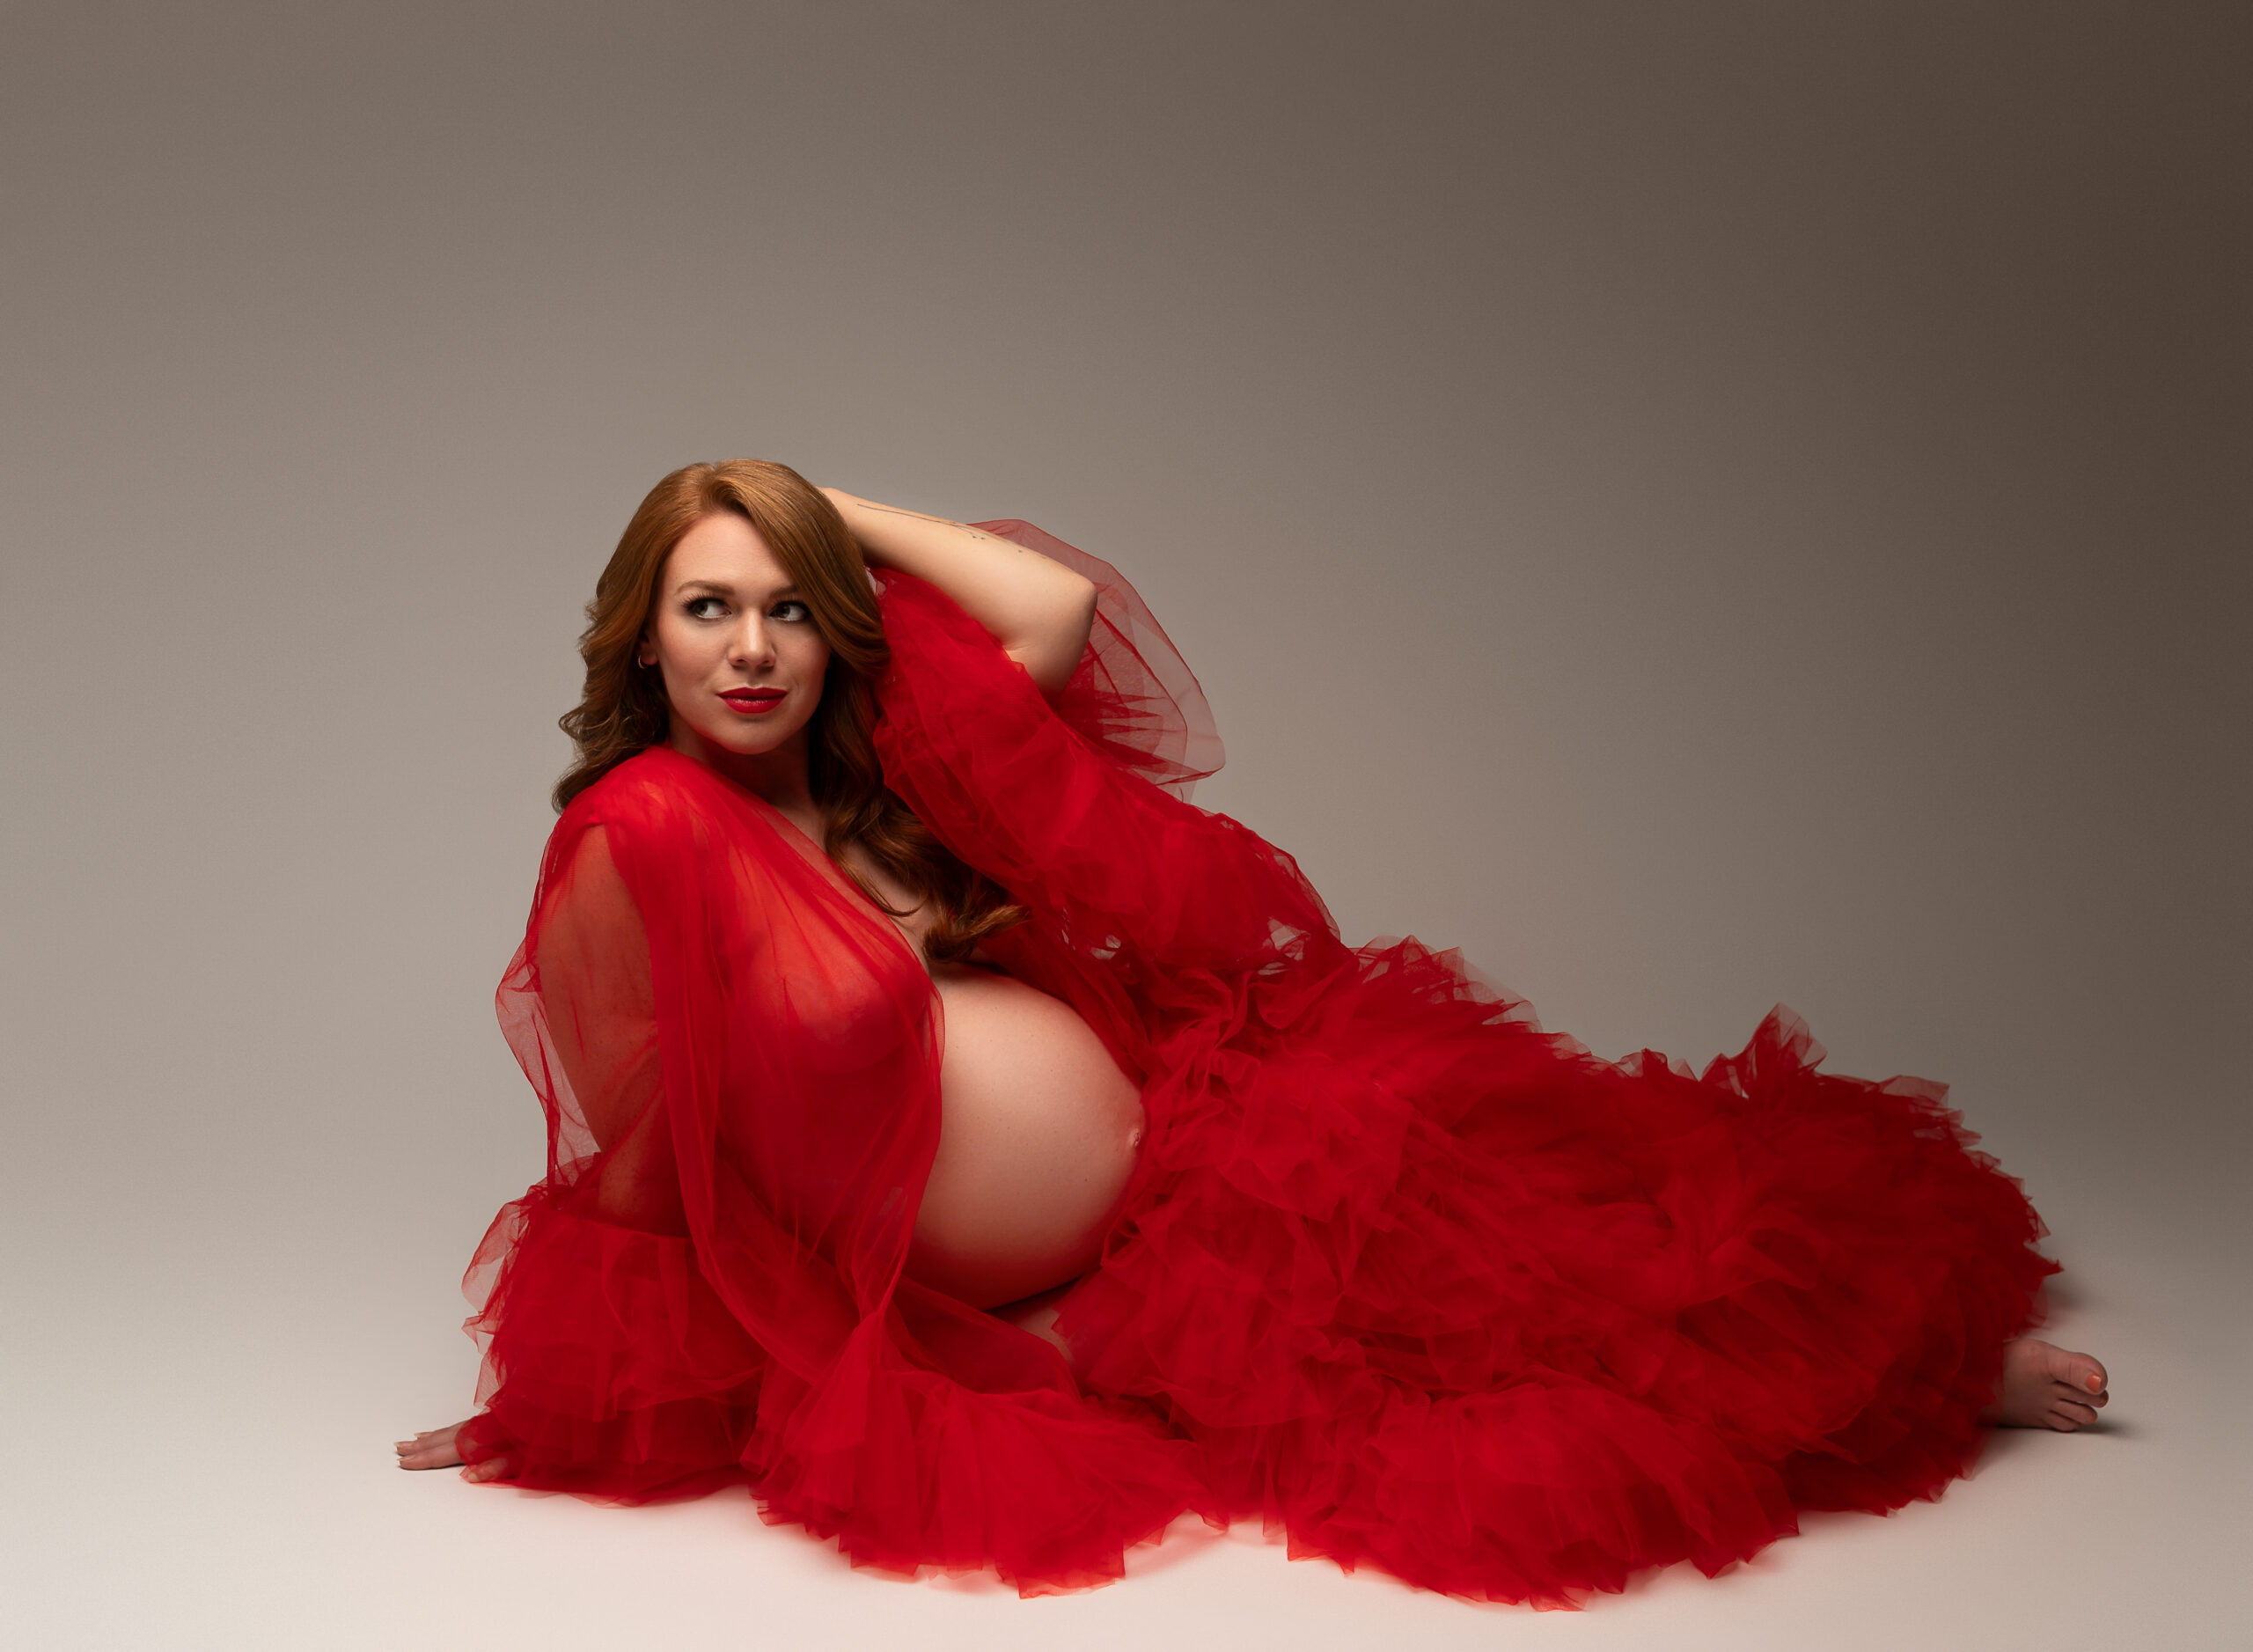 Woman on a neutral black and white background wearing a red taffeta maternity dress. 